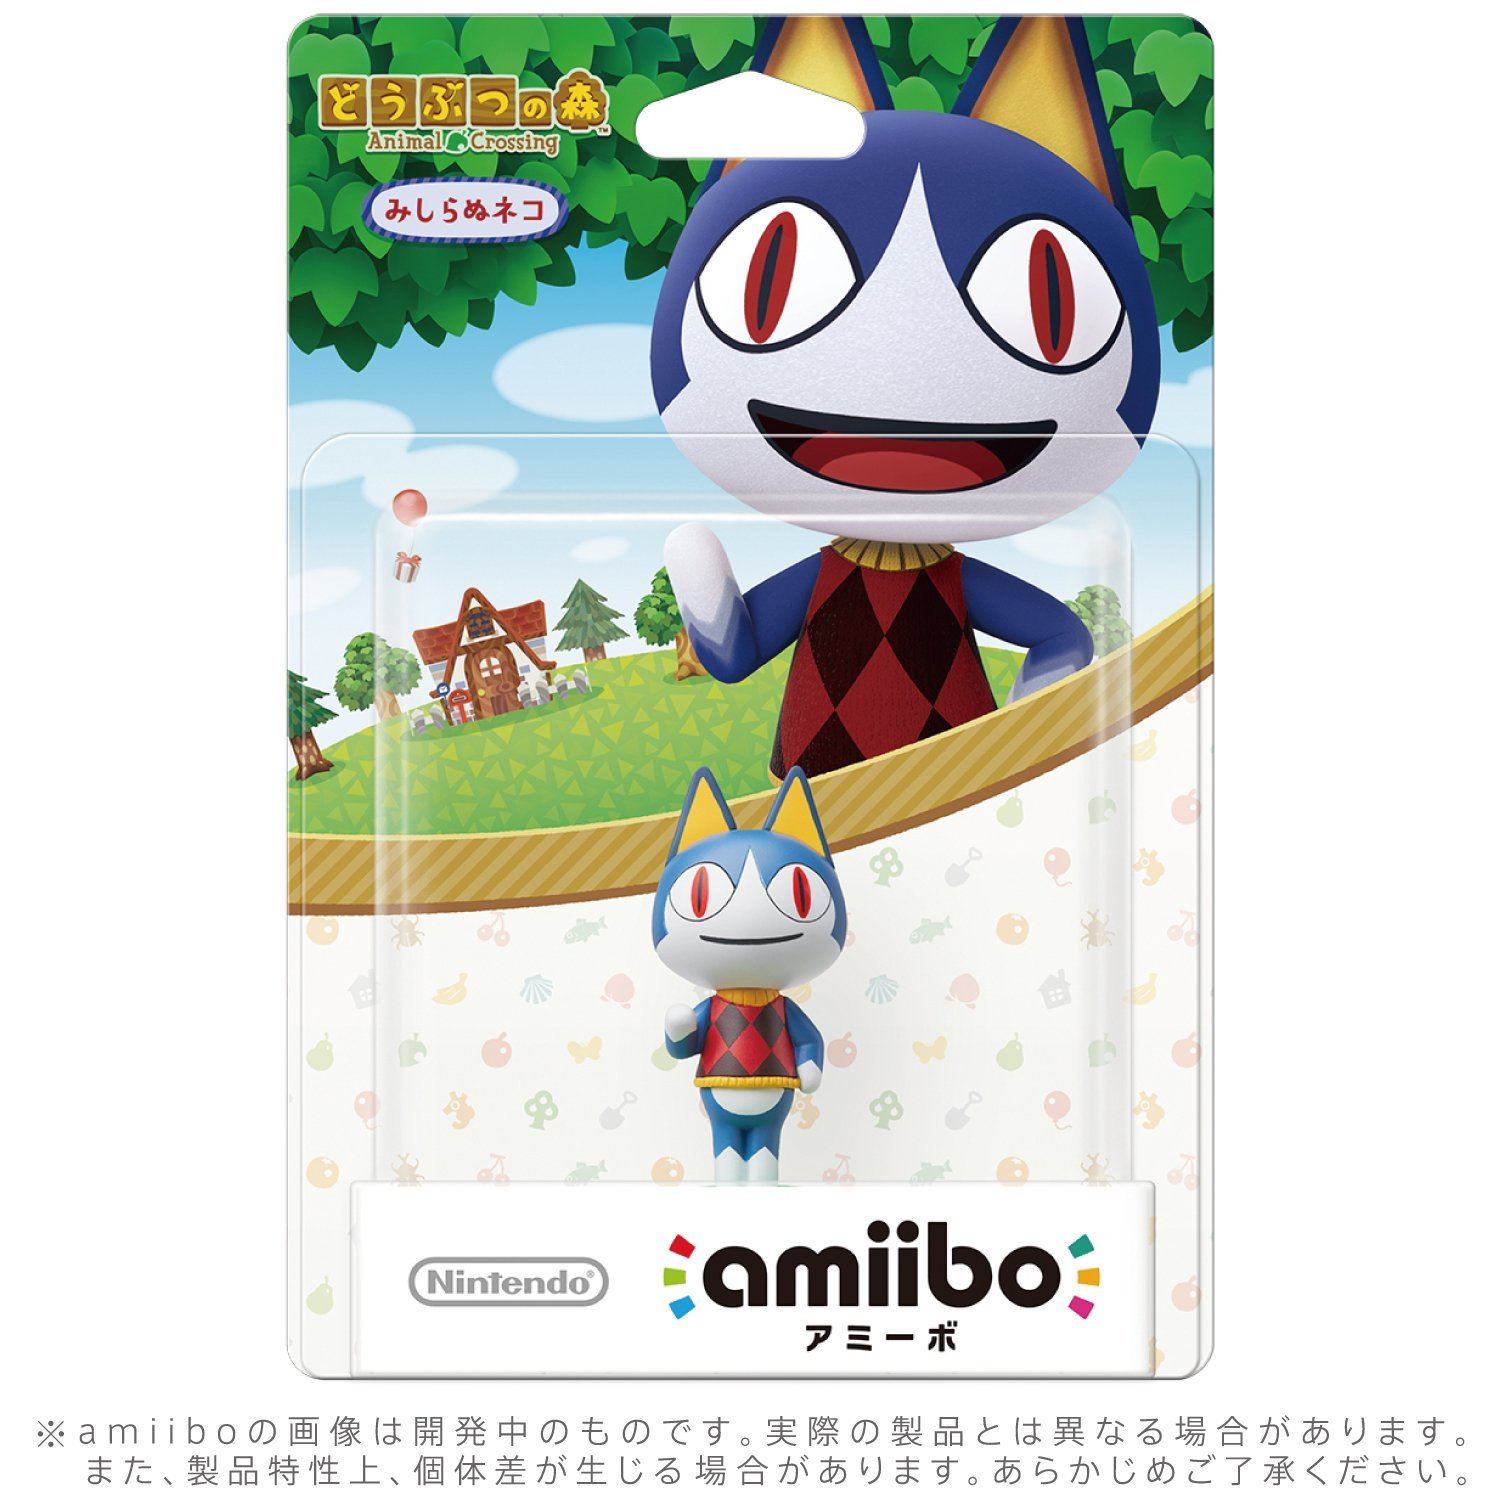 Animal Crossing series – Official Site